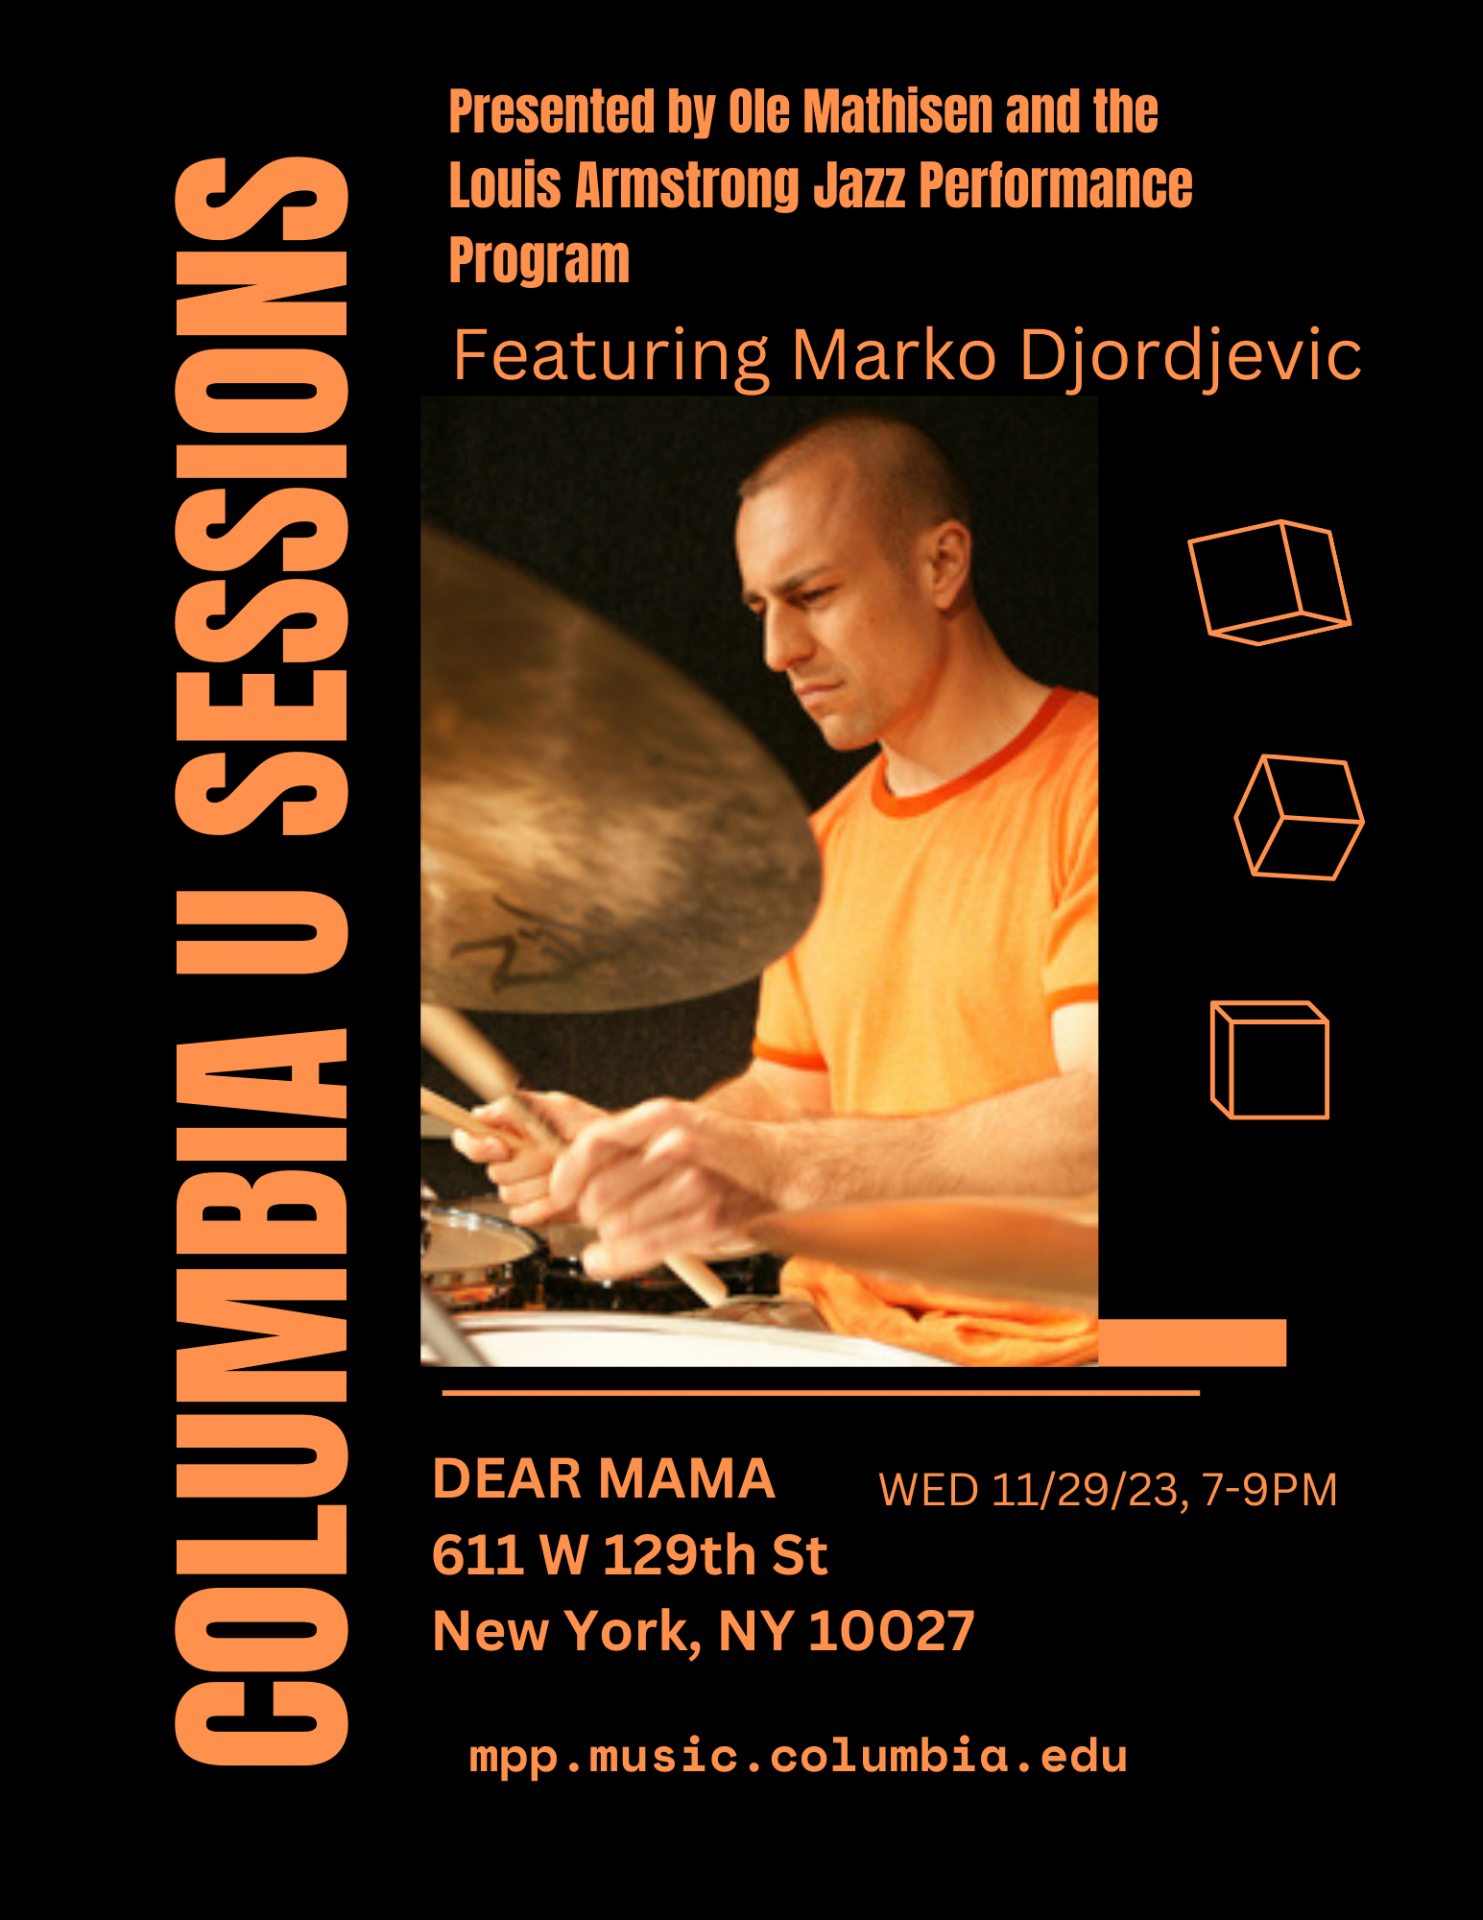 Orange text on black background with a photo of drummer Marko Djordjevic. Details: Ole Mathisen and the Louis Armstrong Jazz Performance Program present Columbia U Sessions at Dear Mama Cafe.